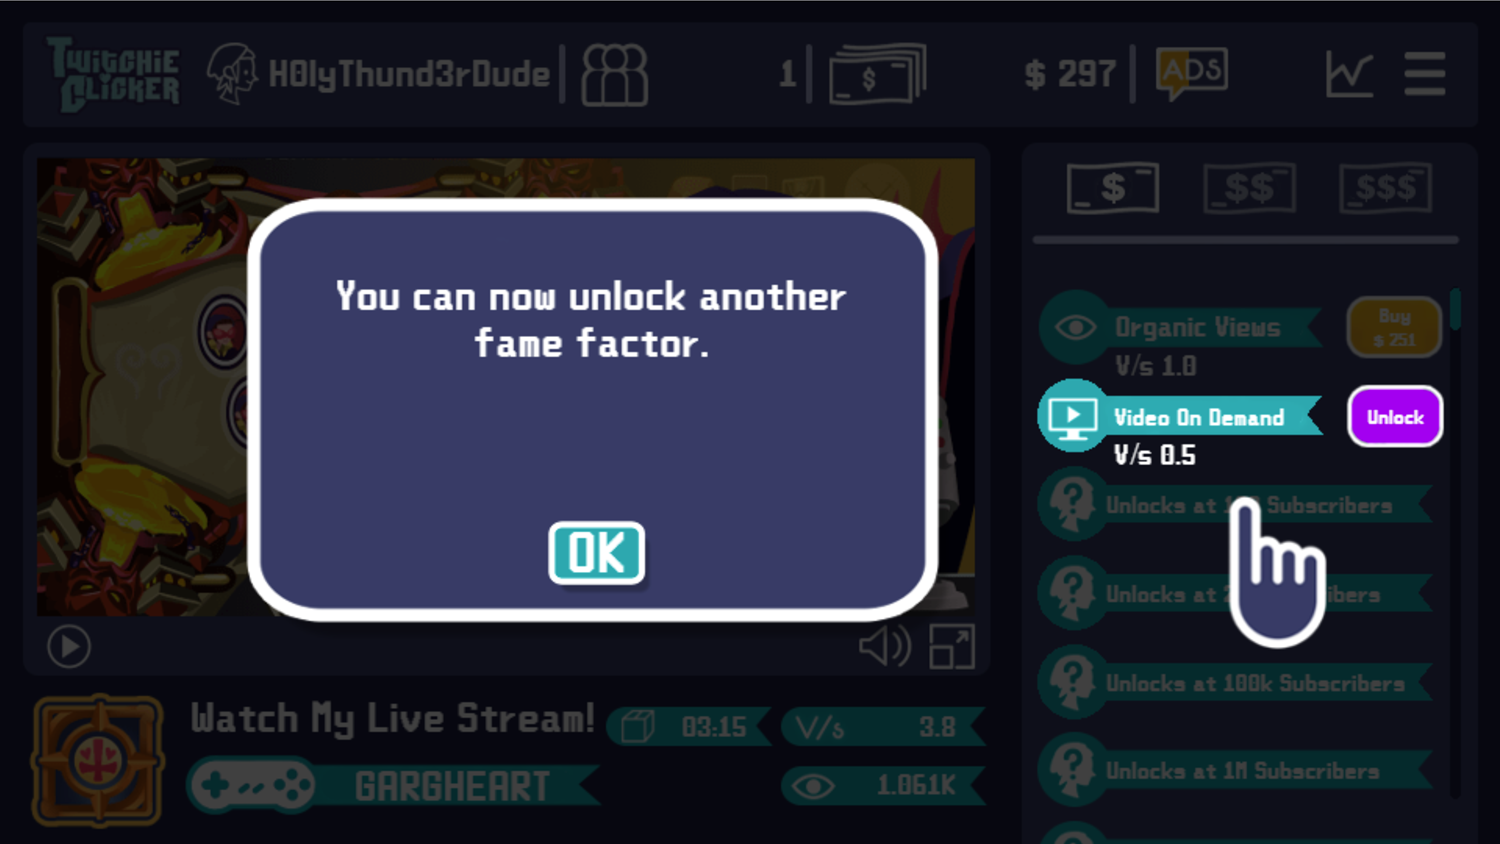 Twitchie Clicker Game Unlock Another Fame Factor Information Screen Screenshot.